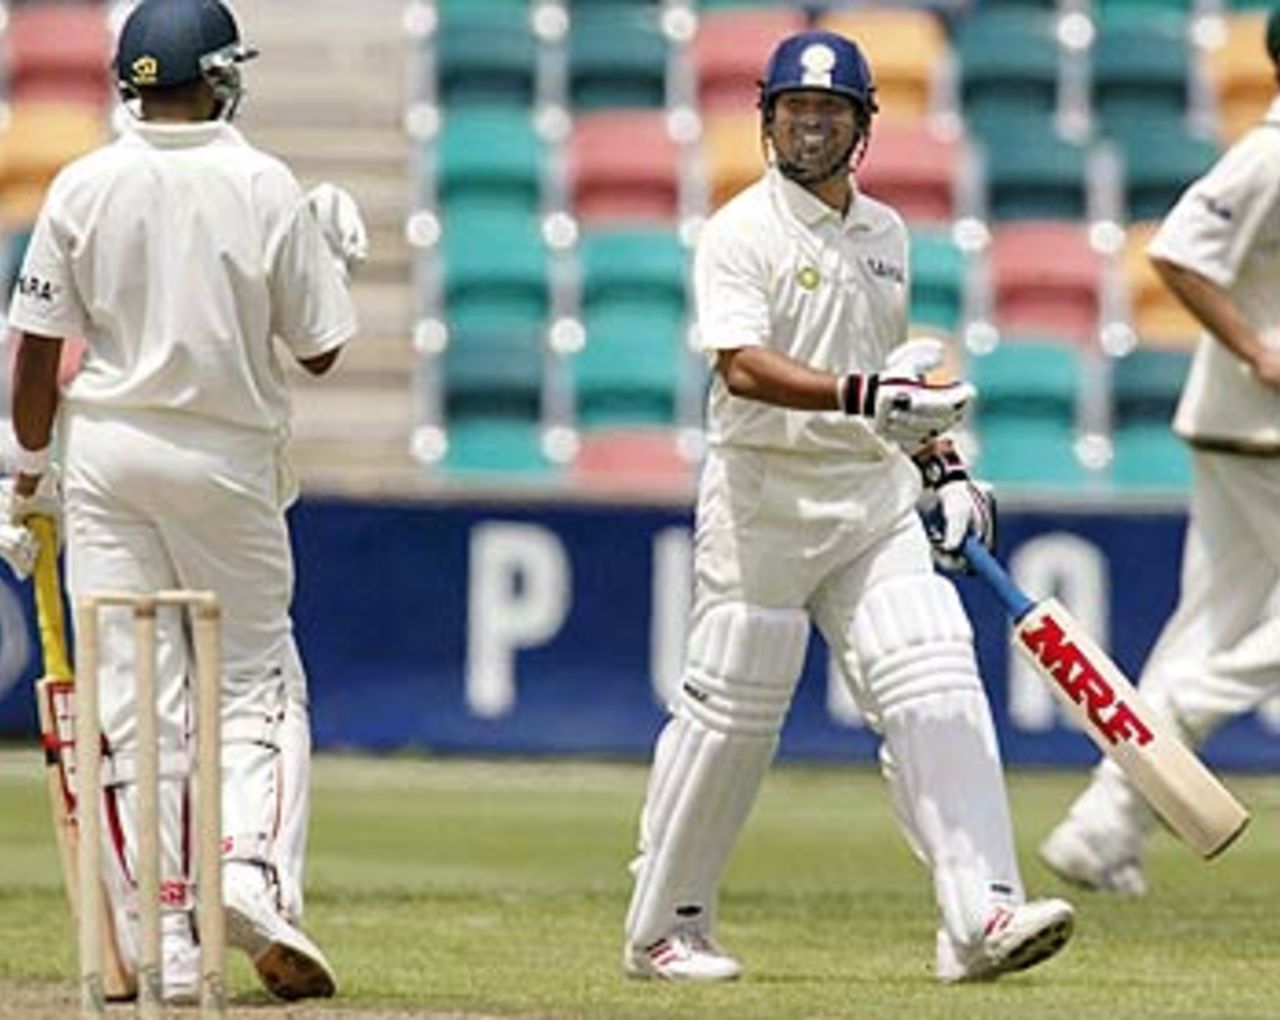 'I'm saving it for Melbourne'. Sachin Tendulkar doesn't seem too aggrieved at being caught at the boundary, Australia A v Indians, tour game, Hobart, 2nd day, December 20, 2003